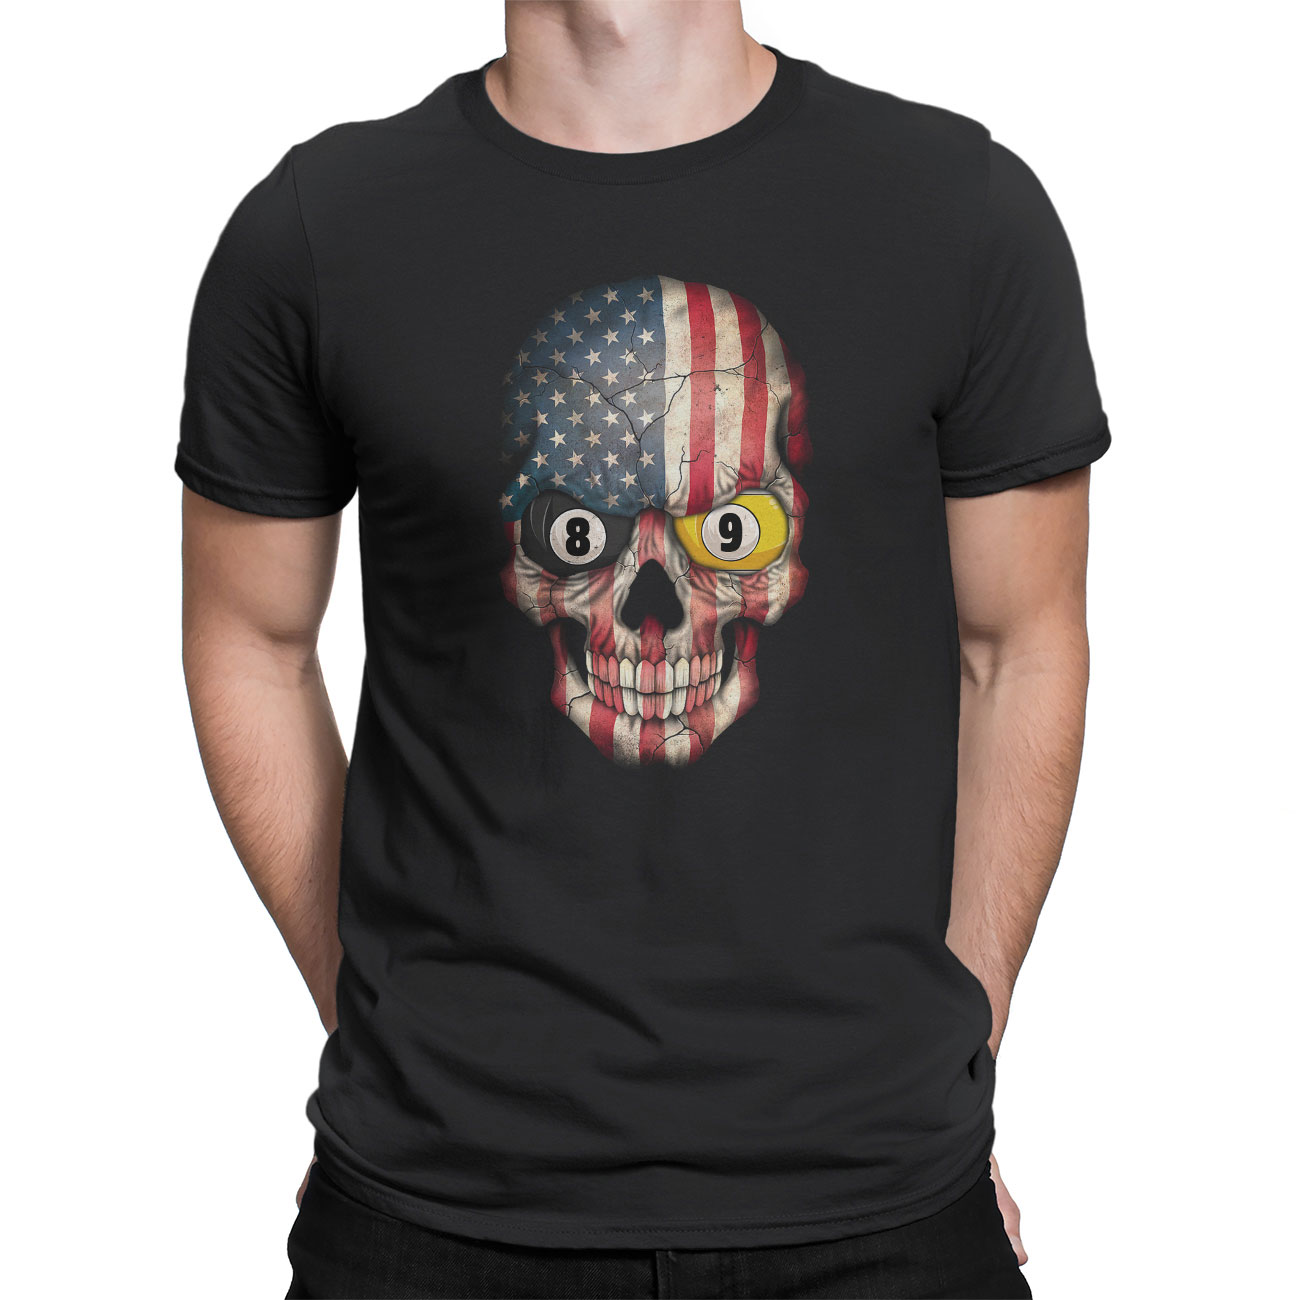 Albany is kompression Graphics T-Shirts – Funny Pool Billiard Snooker Design – Skull with US Flag  Gift Shirt – Crew Neck Short Sleeve – HomeWix